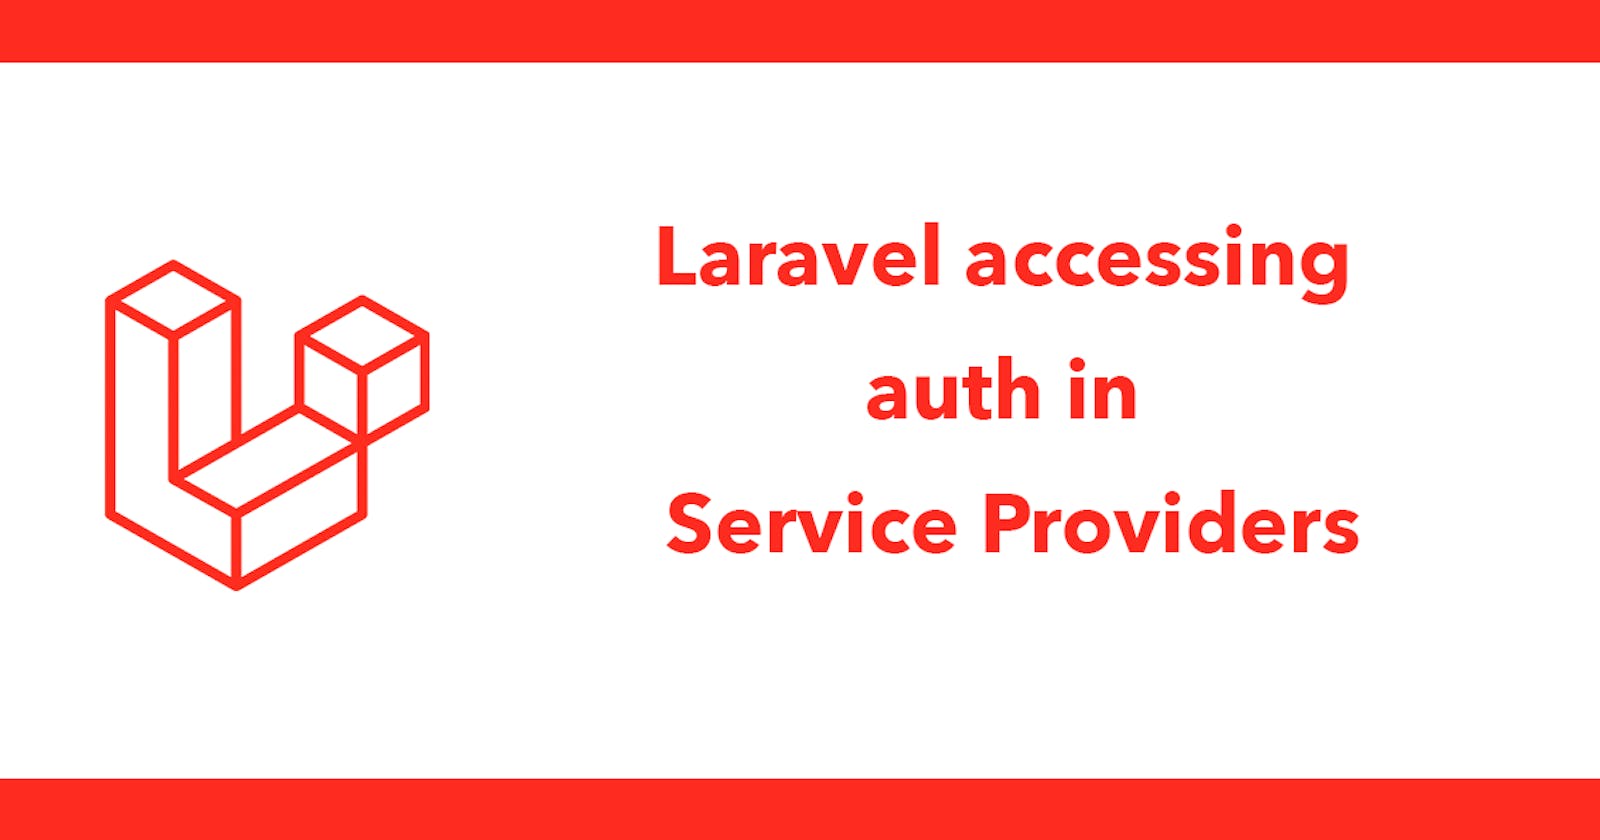 Laravel accessing auth in Service Providers